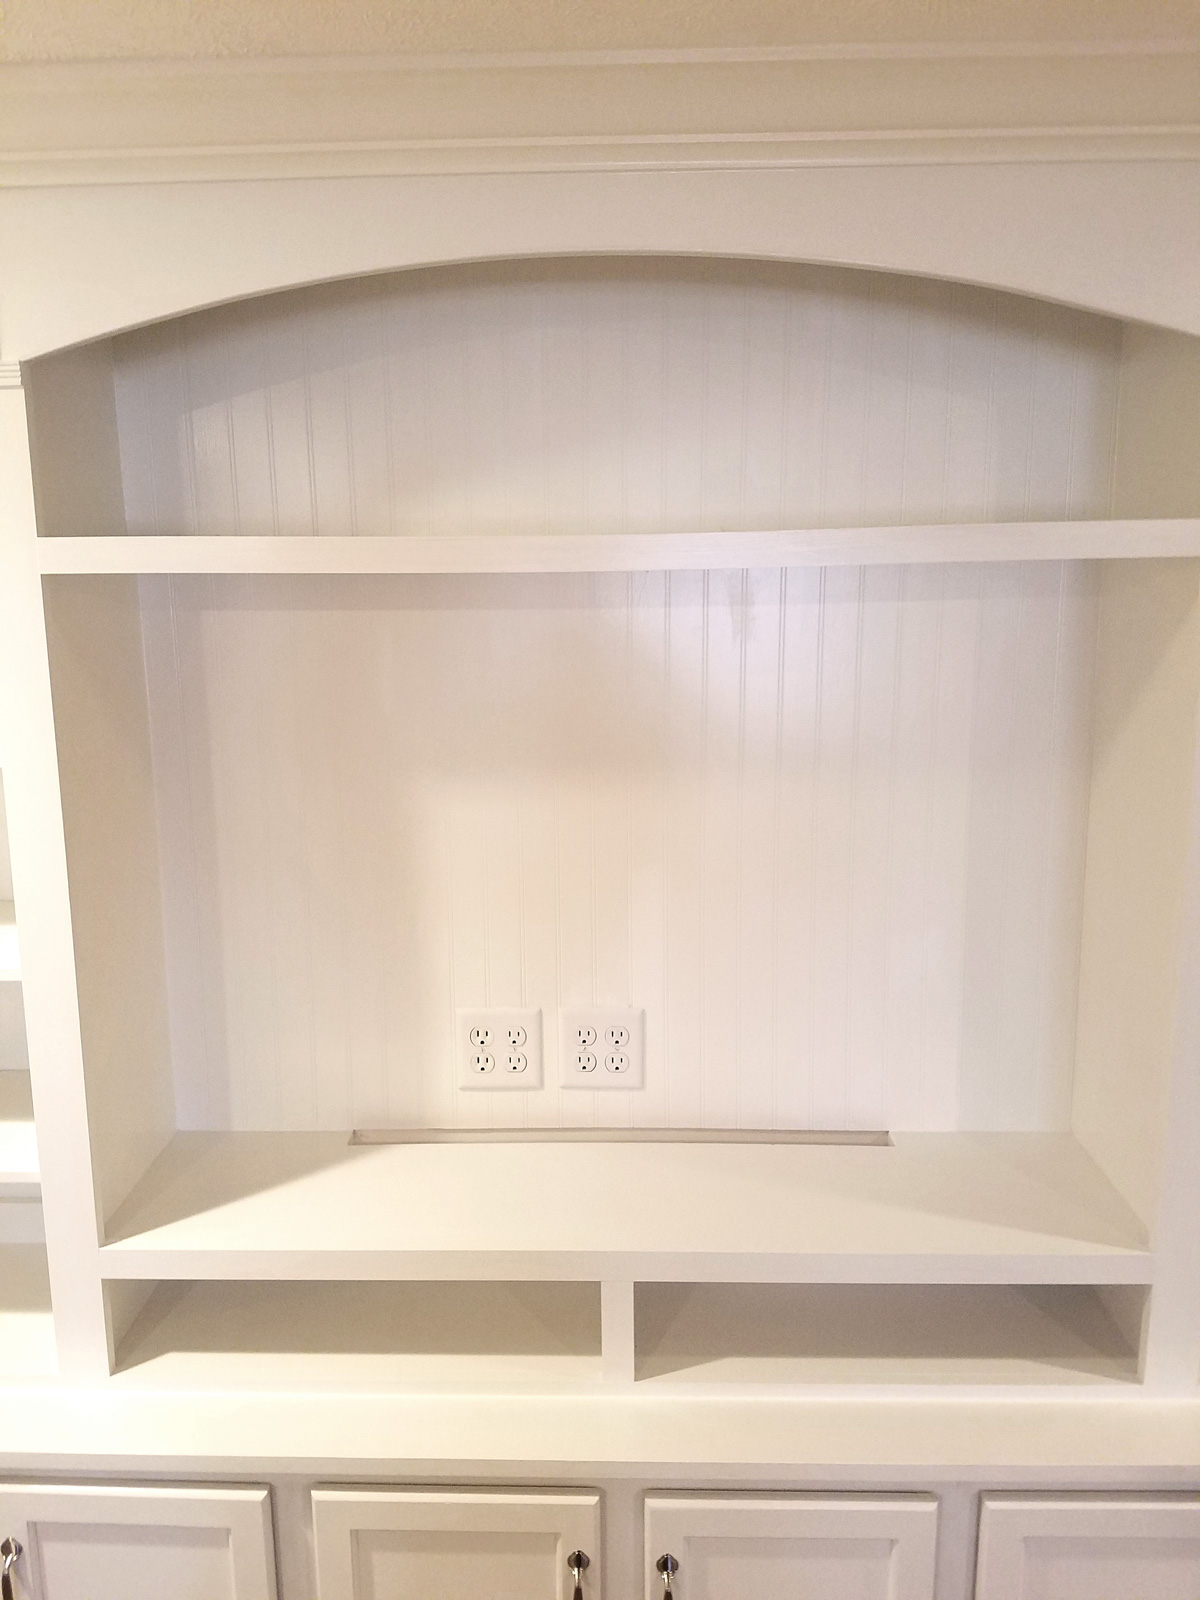 A large, white entertainment center with top shelves and bottom cabinets.